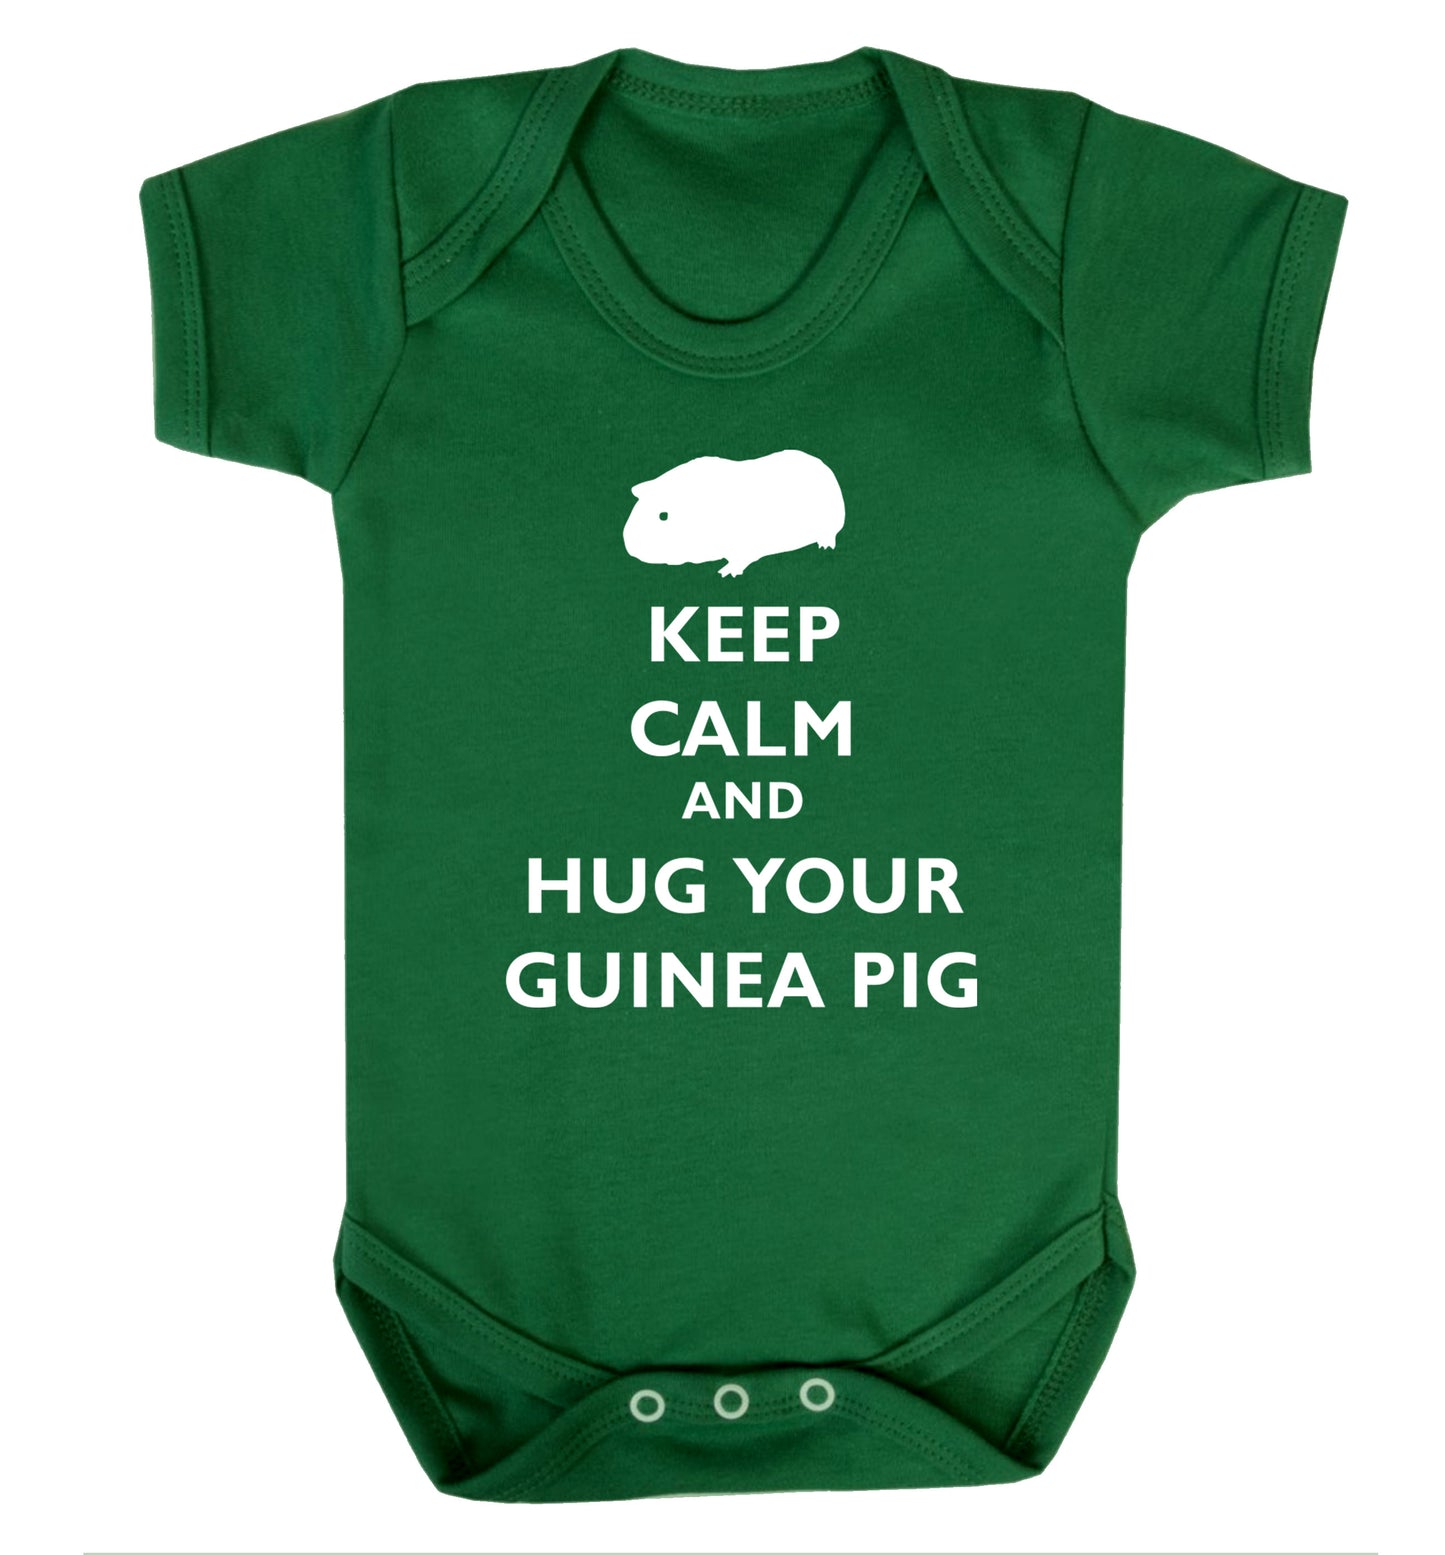 Keep calm and hug your guineapig Baby Vest green 18-24 months